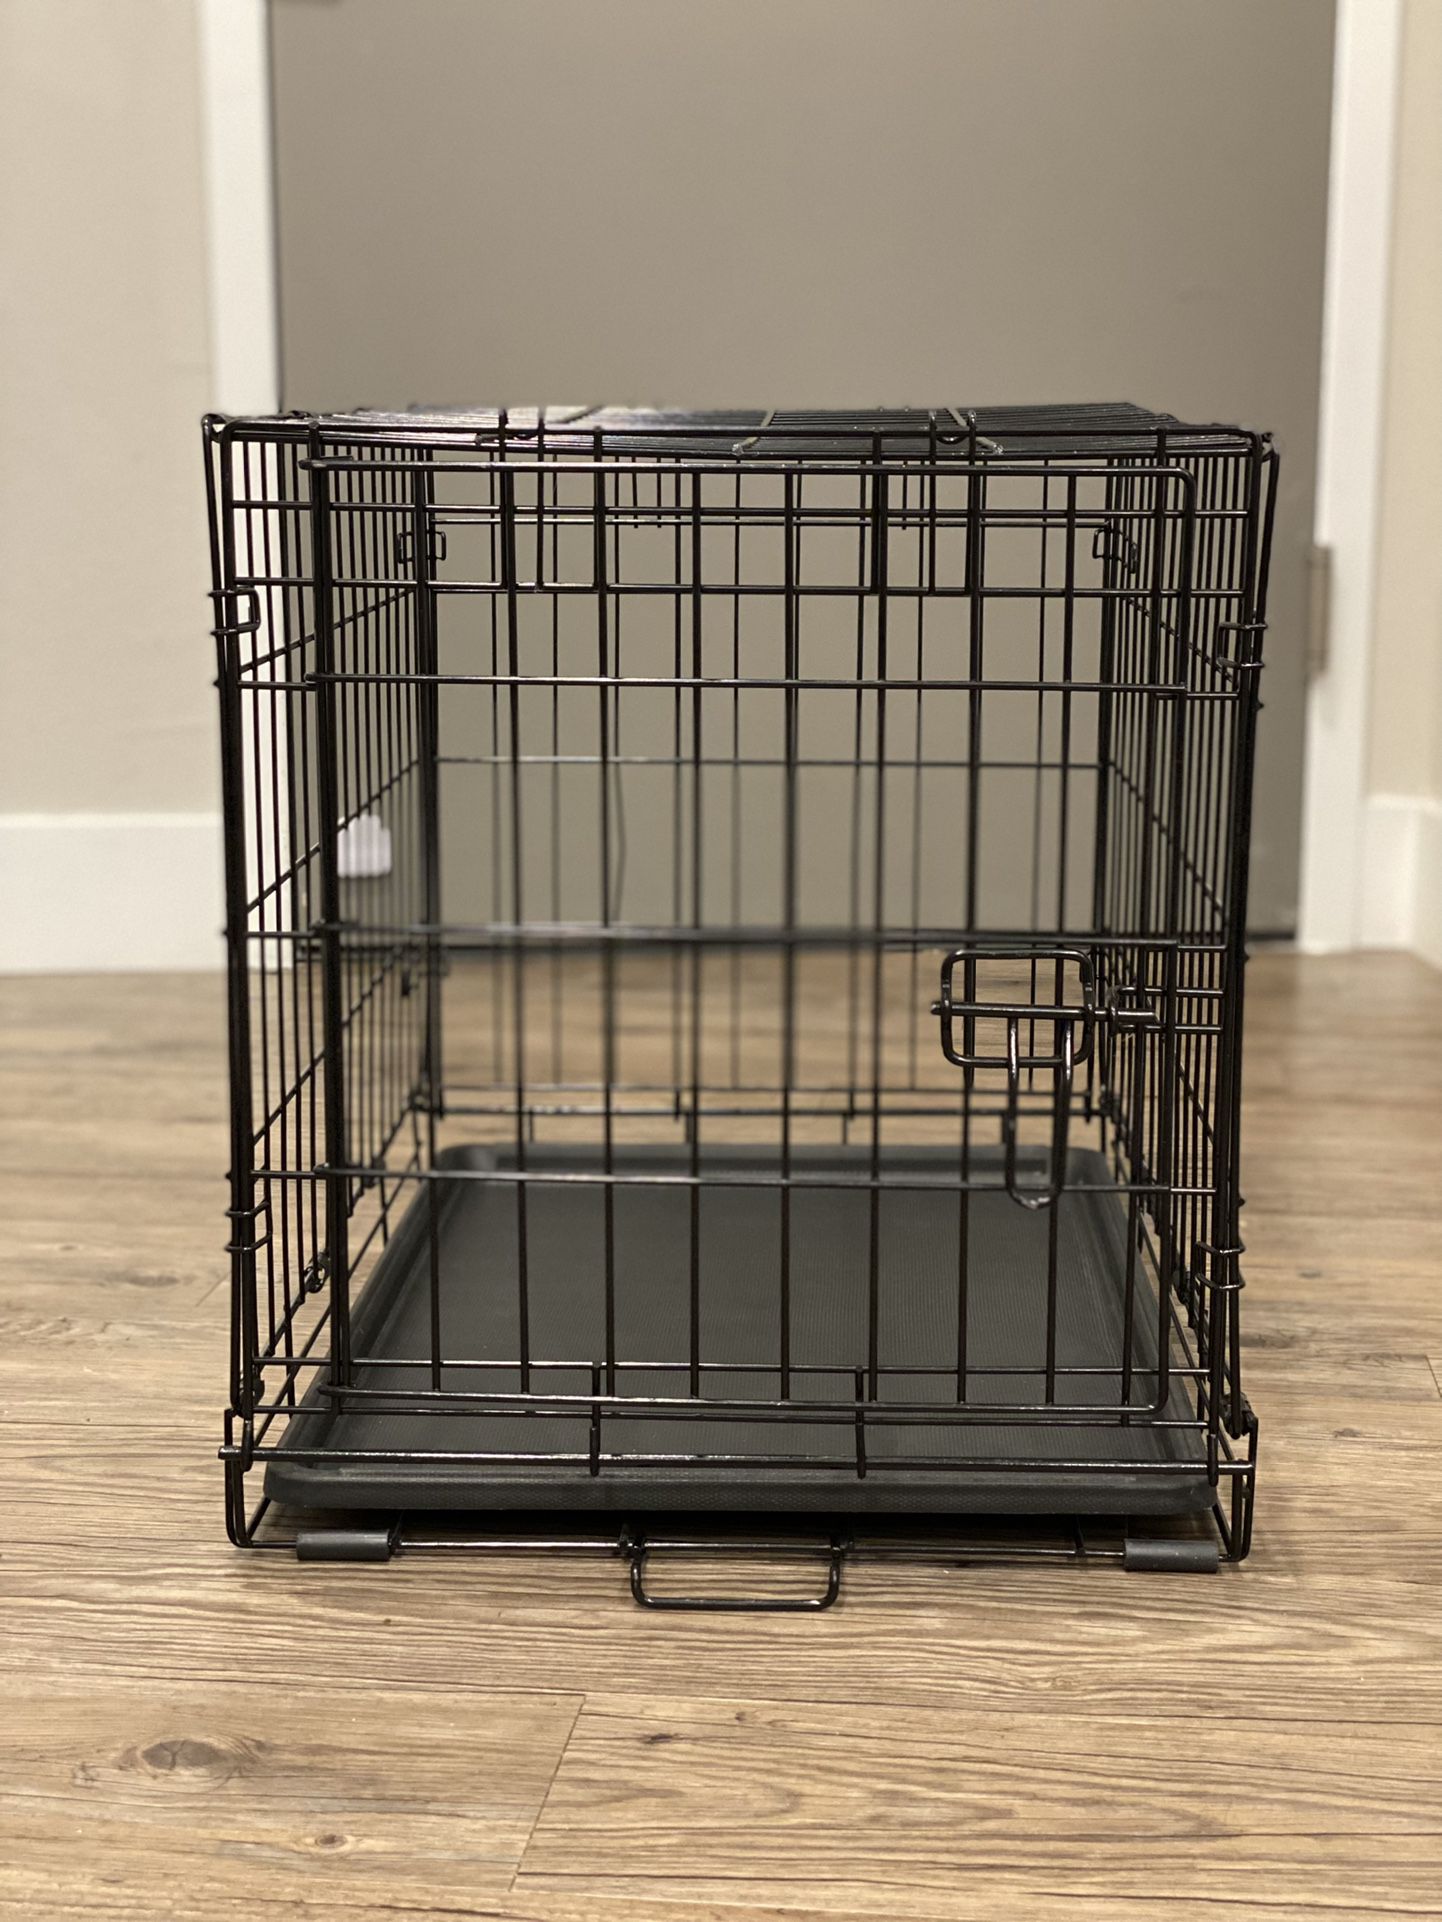 M24" Folding Metal Pet Crate For Small Breed Dog Or Bunny (under 15 Pounds)